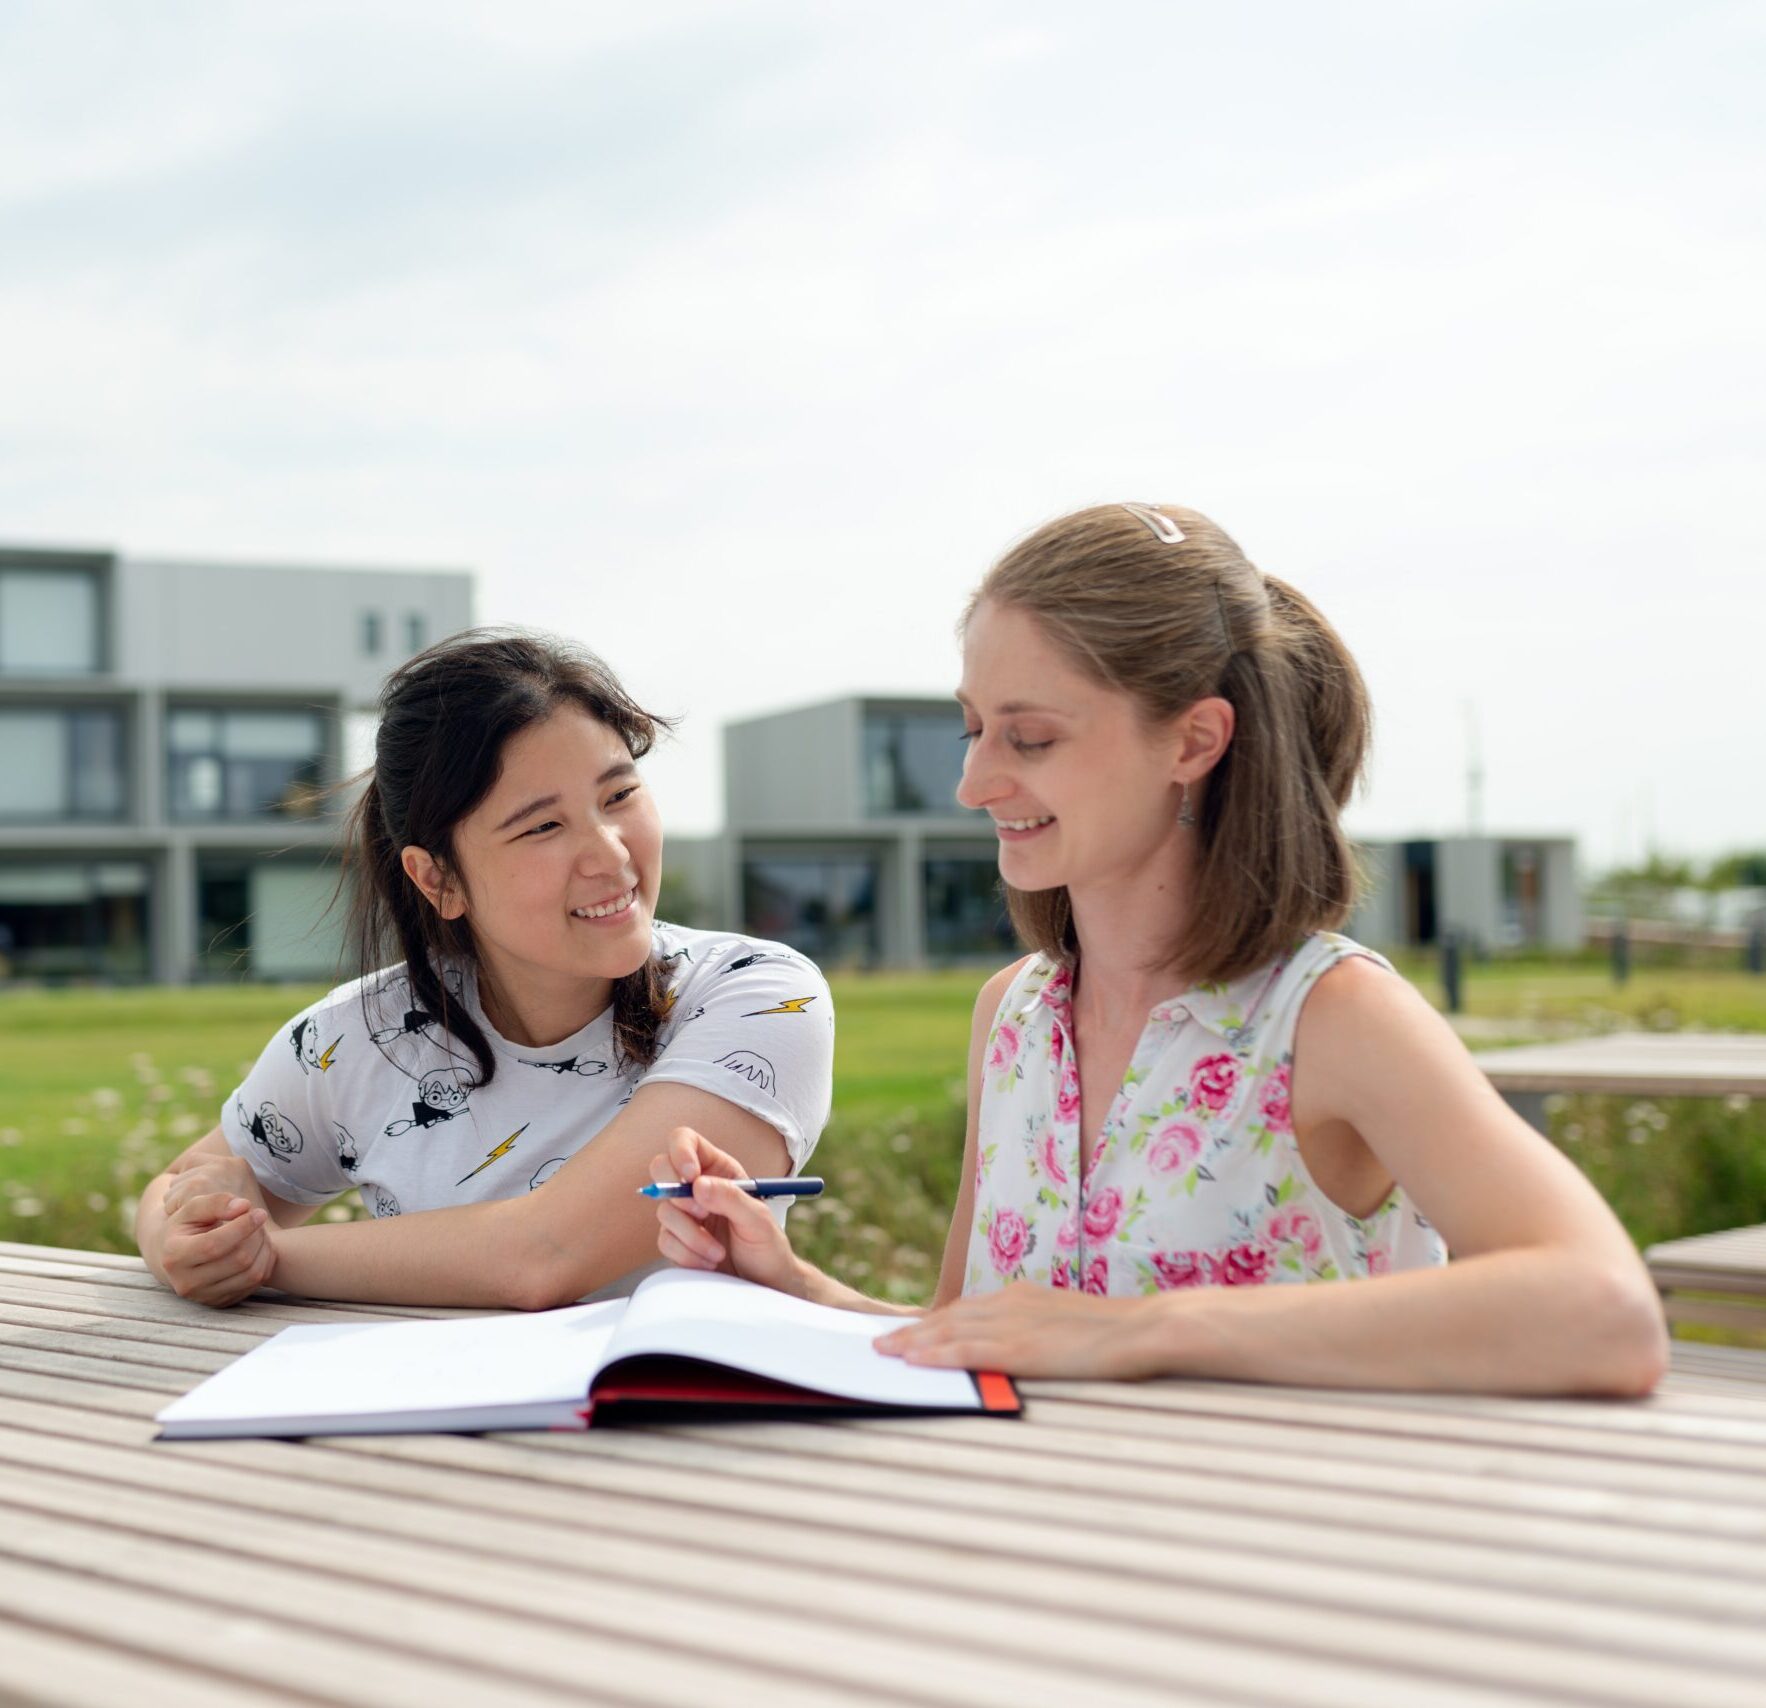 Two girls at an academic tutoring session outside